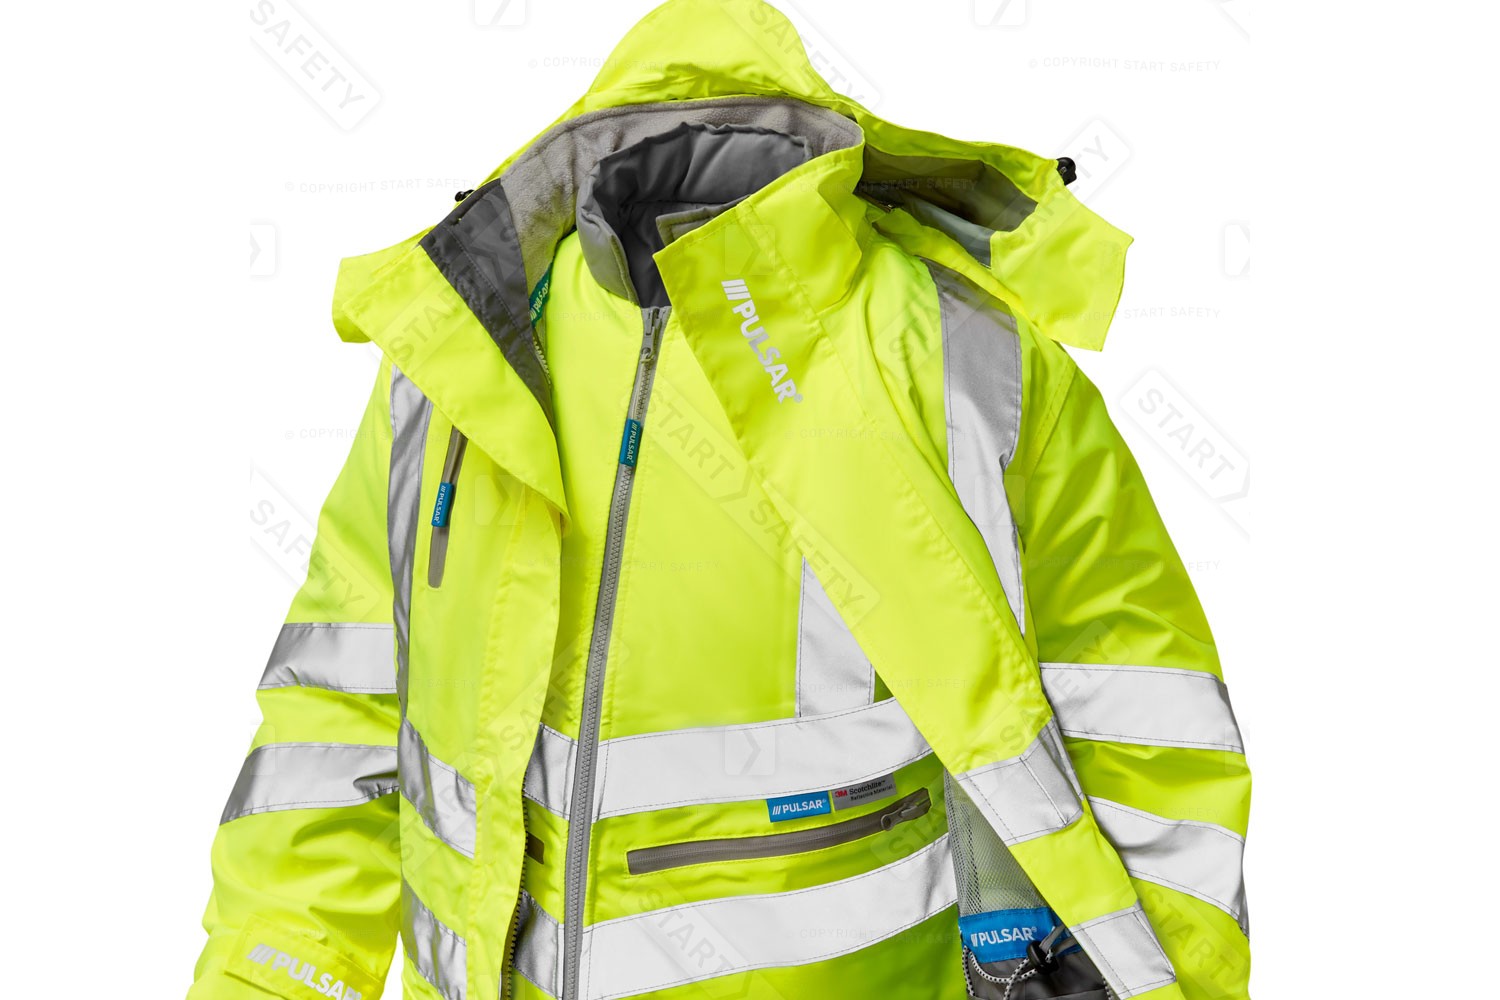 Soft Shell Jacket Used As A Underlayer To A Storm Coat